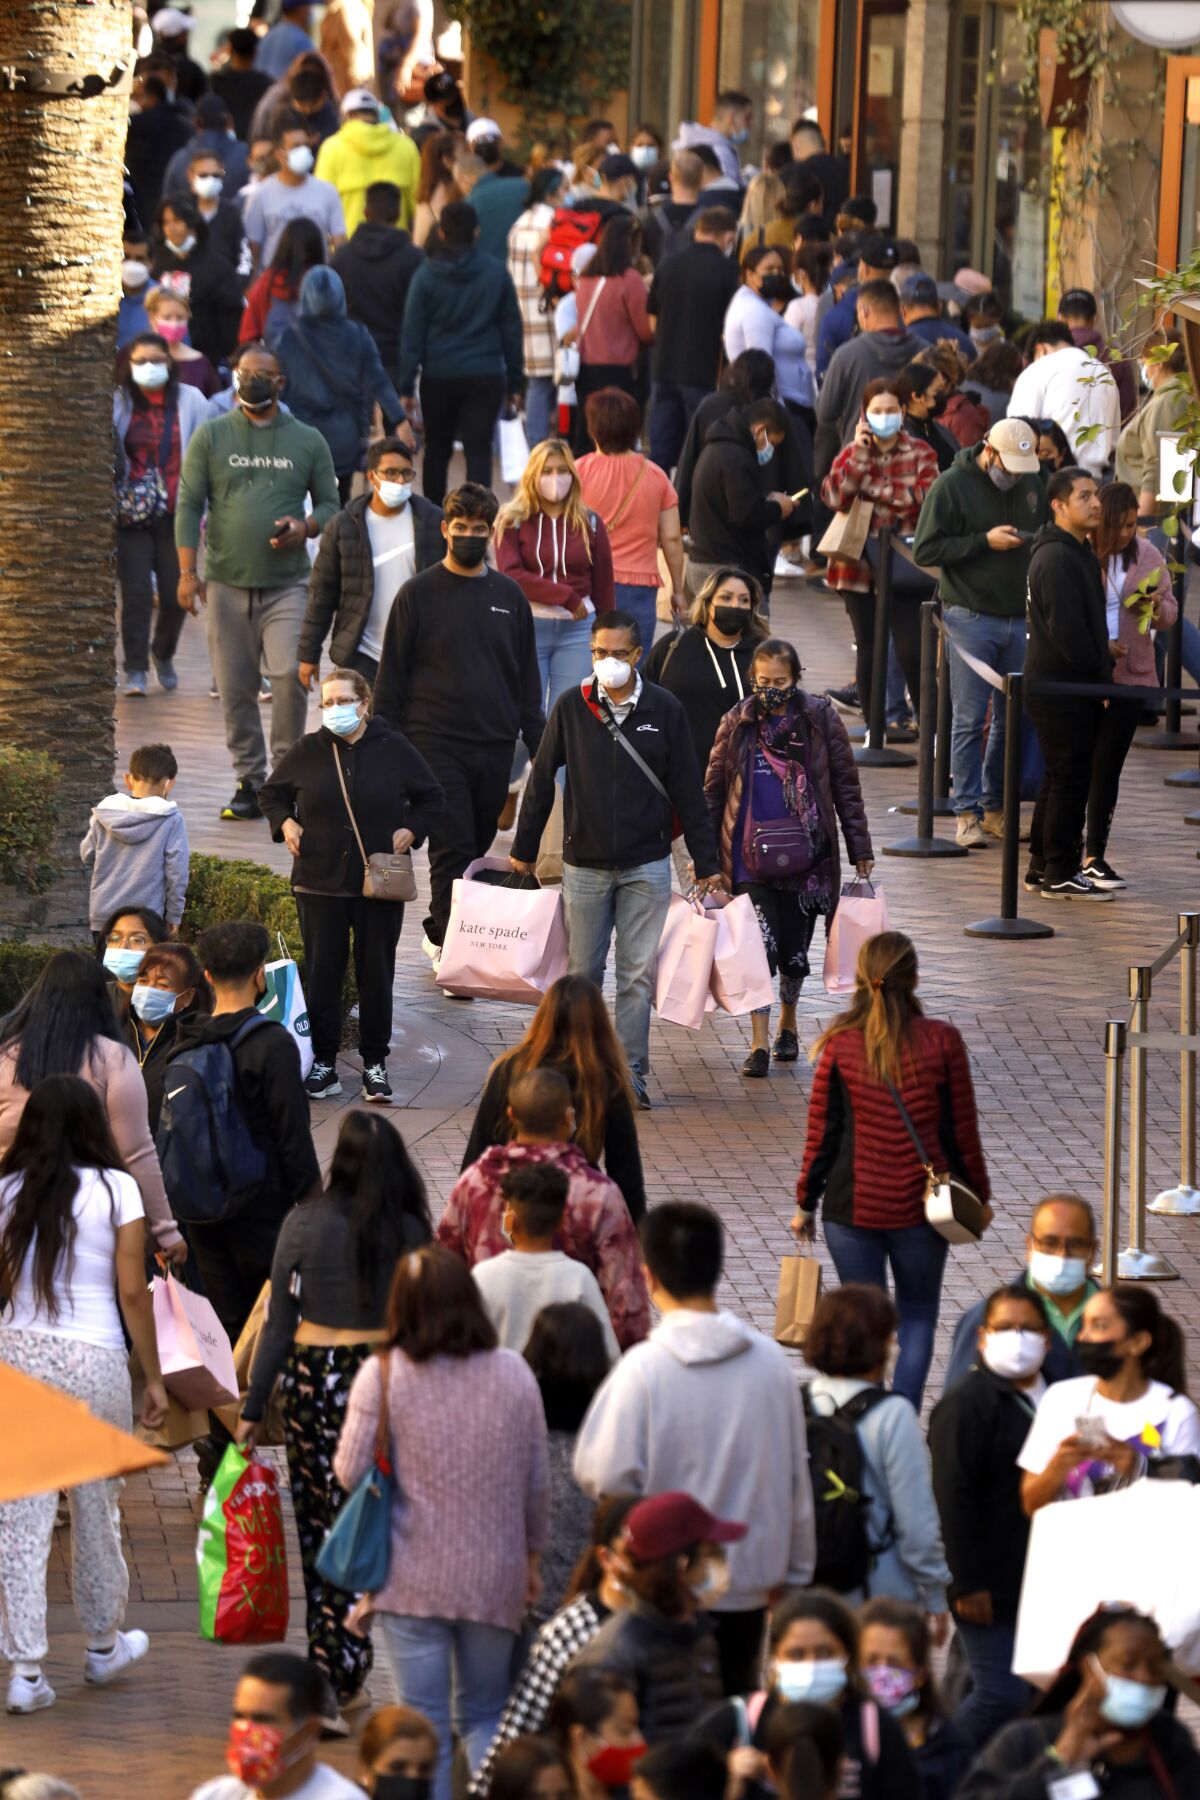 Black Friday brought crowds to the Citadel Outlets on the day after Thanksgiving, Nov. 26, 2021 in Los Angeles